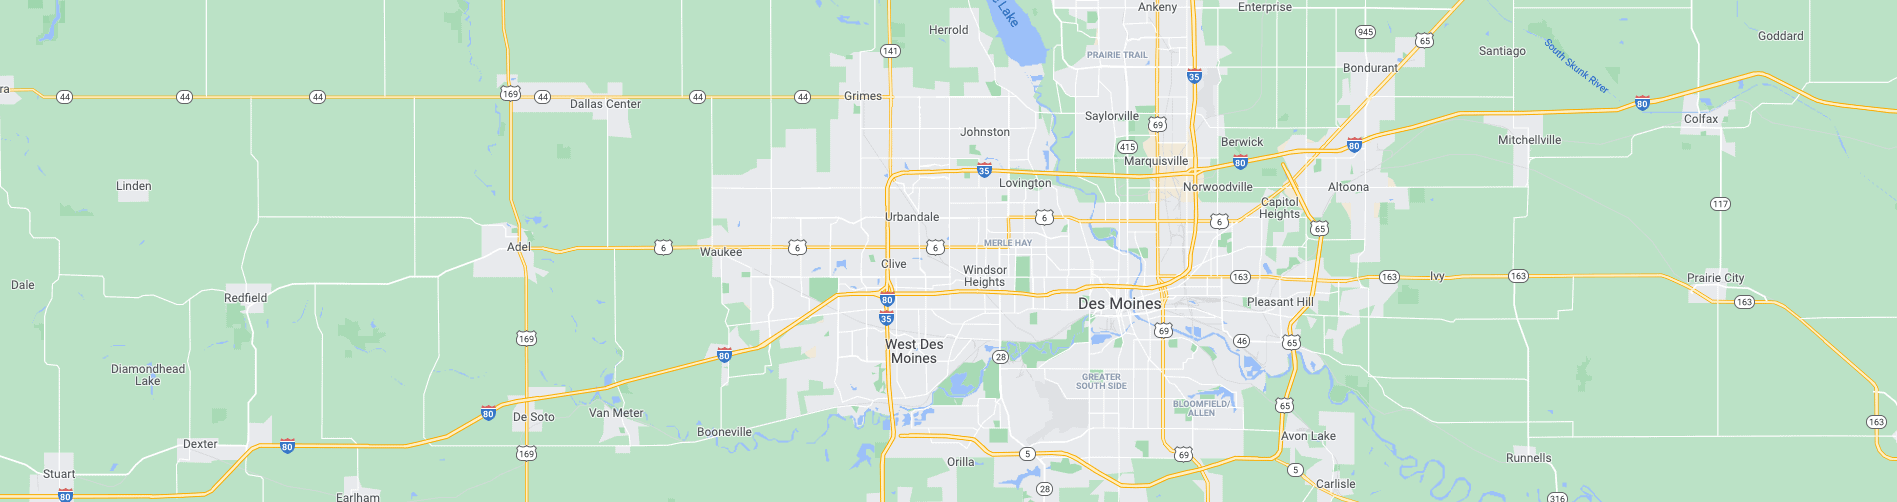 Google map screenshot of Des Moines and Urbandale Iowa